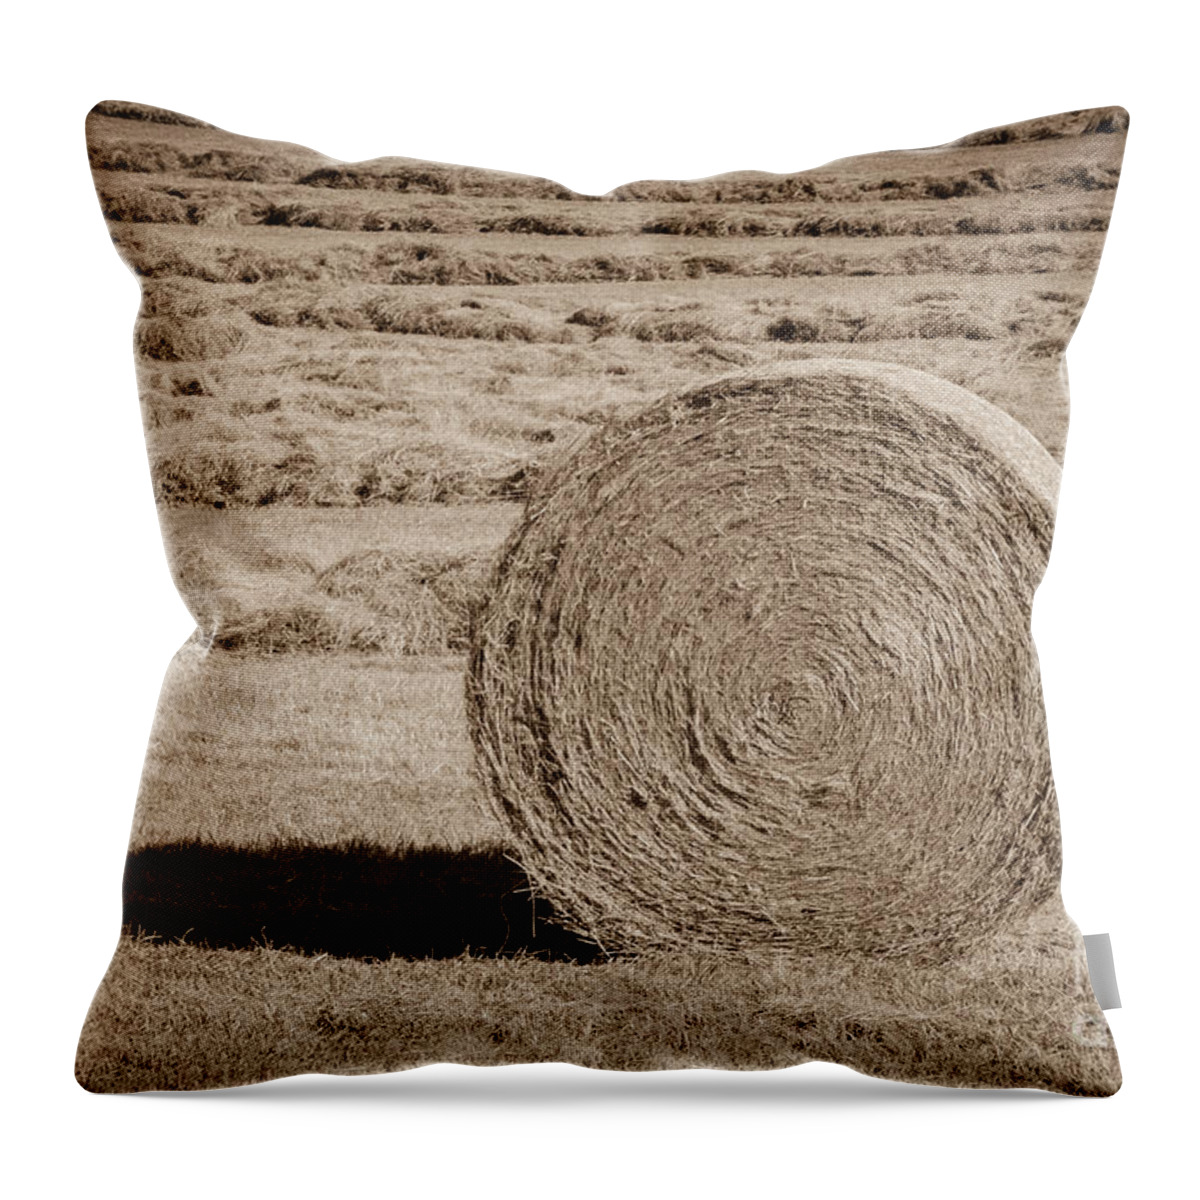 Hay Bales Throw Pillow featuring the photograph Concentric by Tamara Becker